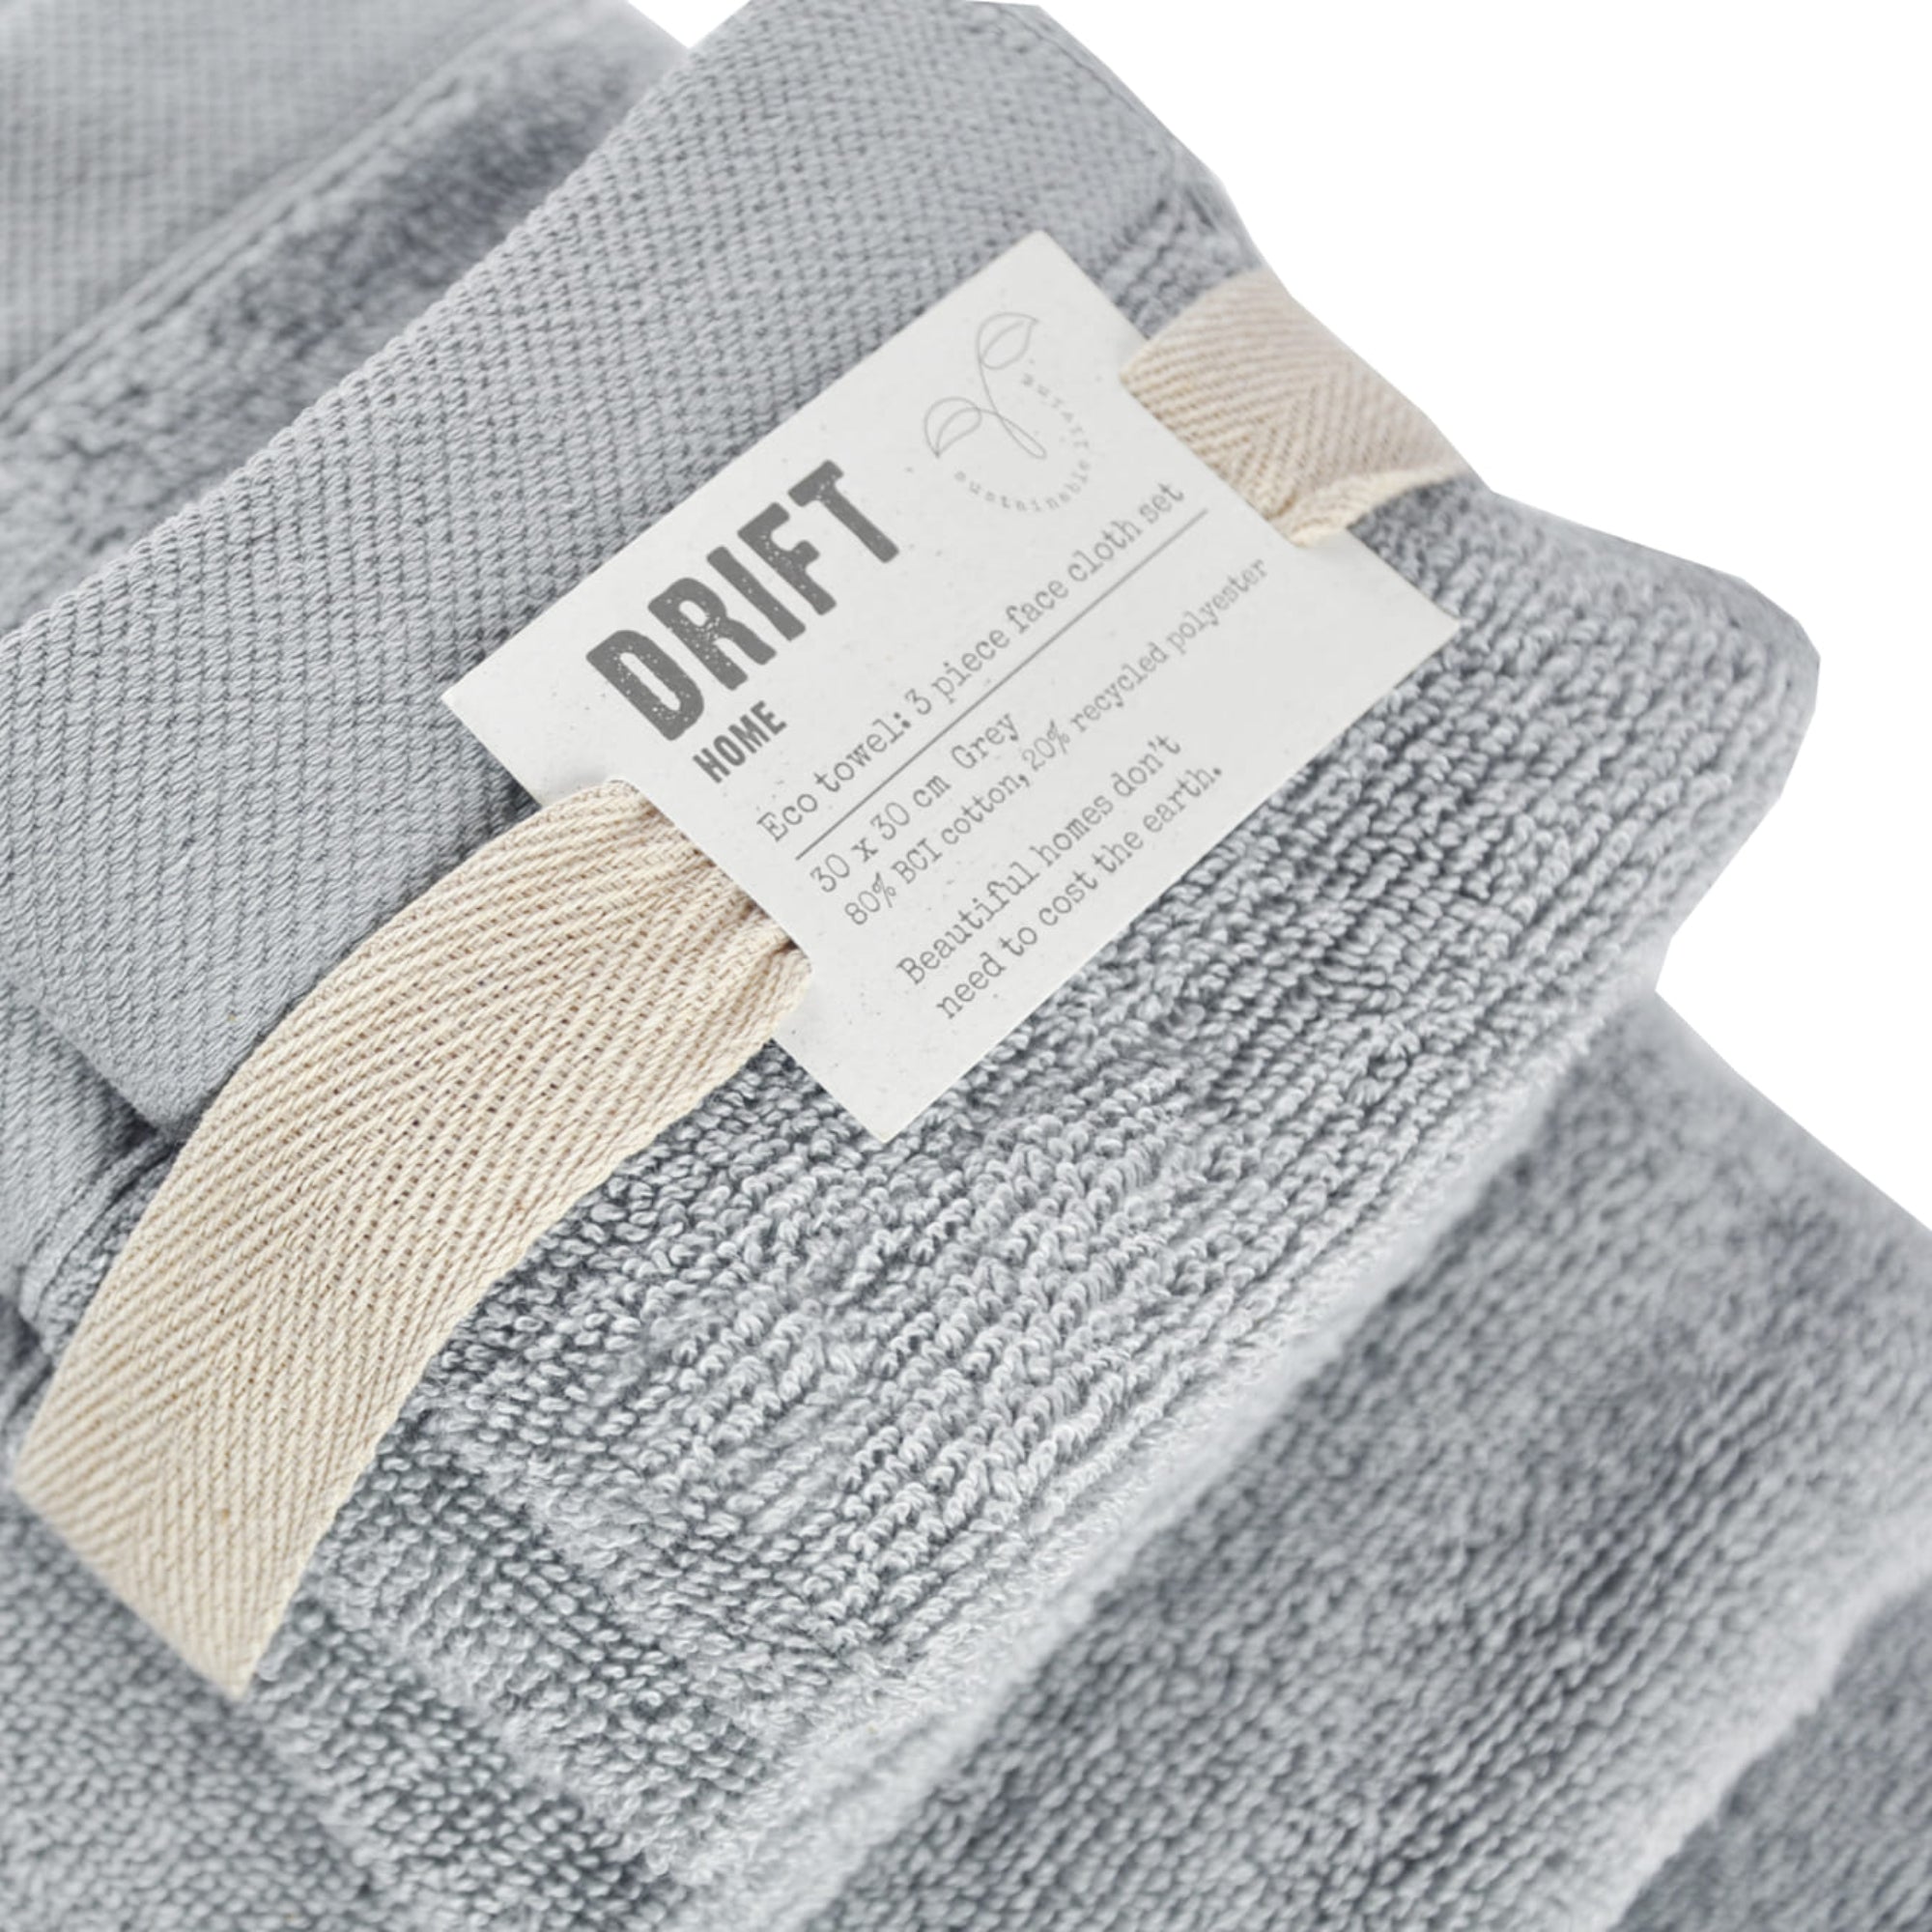 Face Cloth (3 pack) Abode Eco by Drift Home in Grey